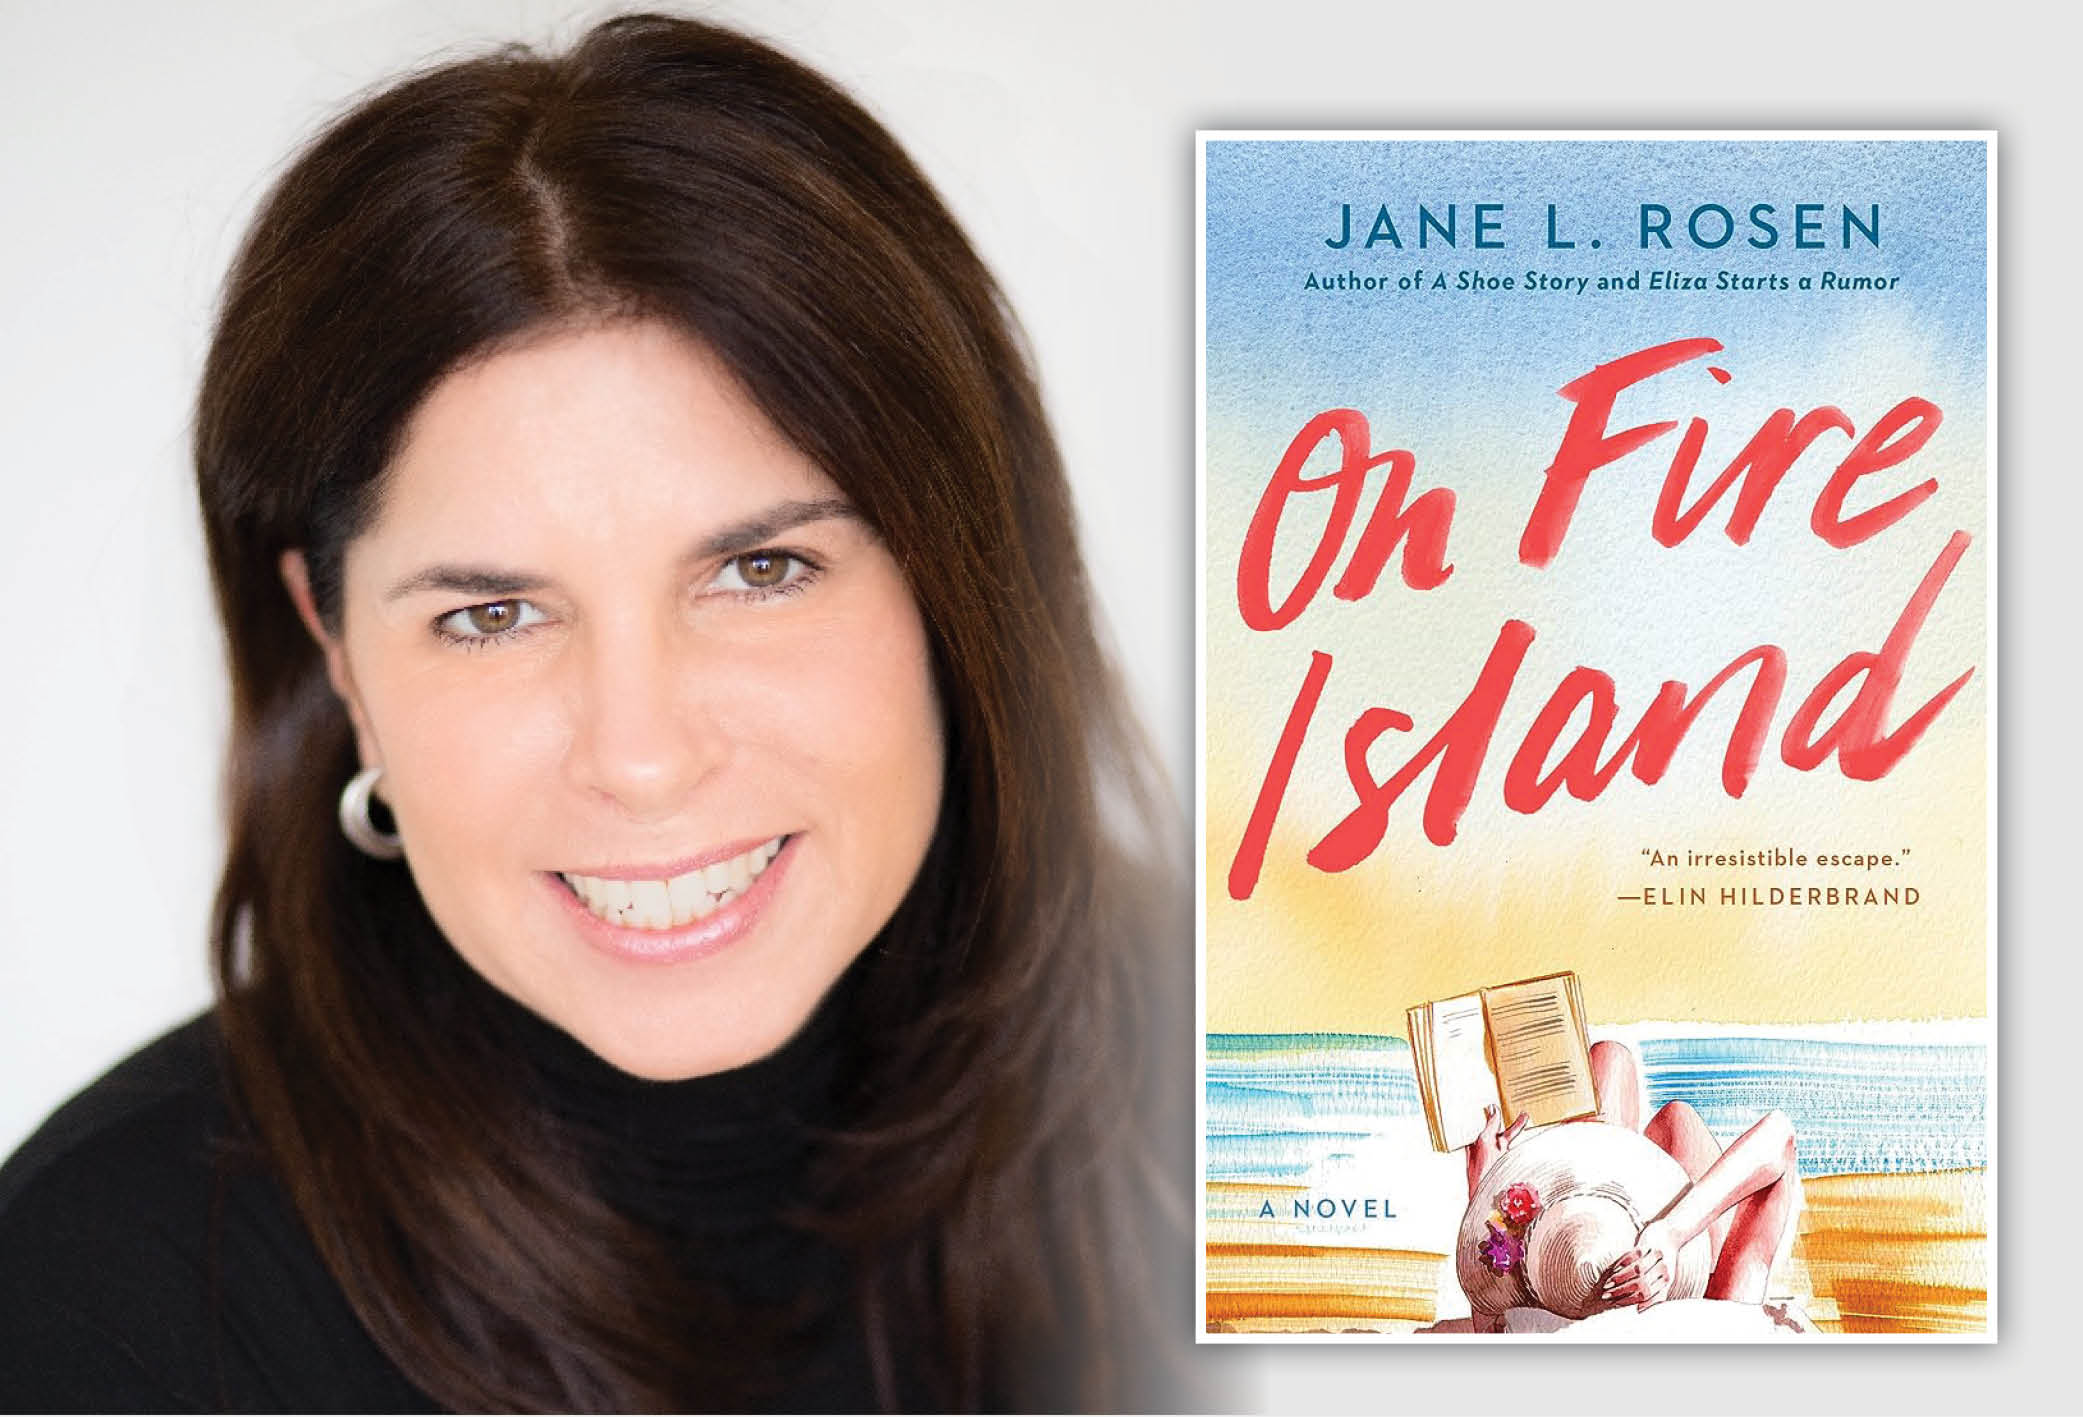 Thursday, March 28 On Fire Island by Jane Rosen